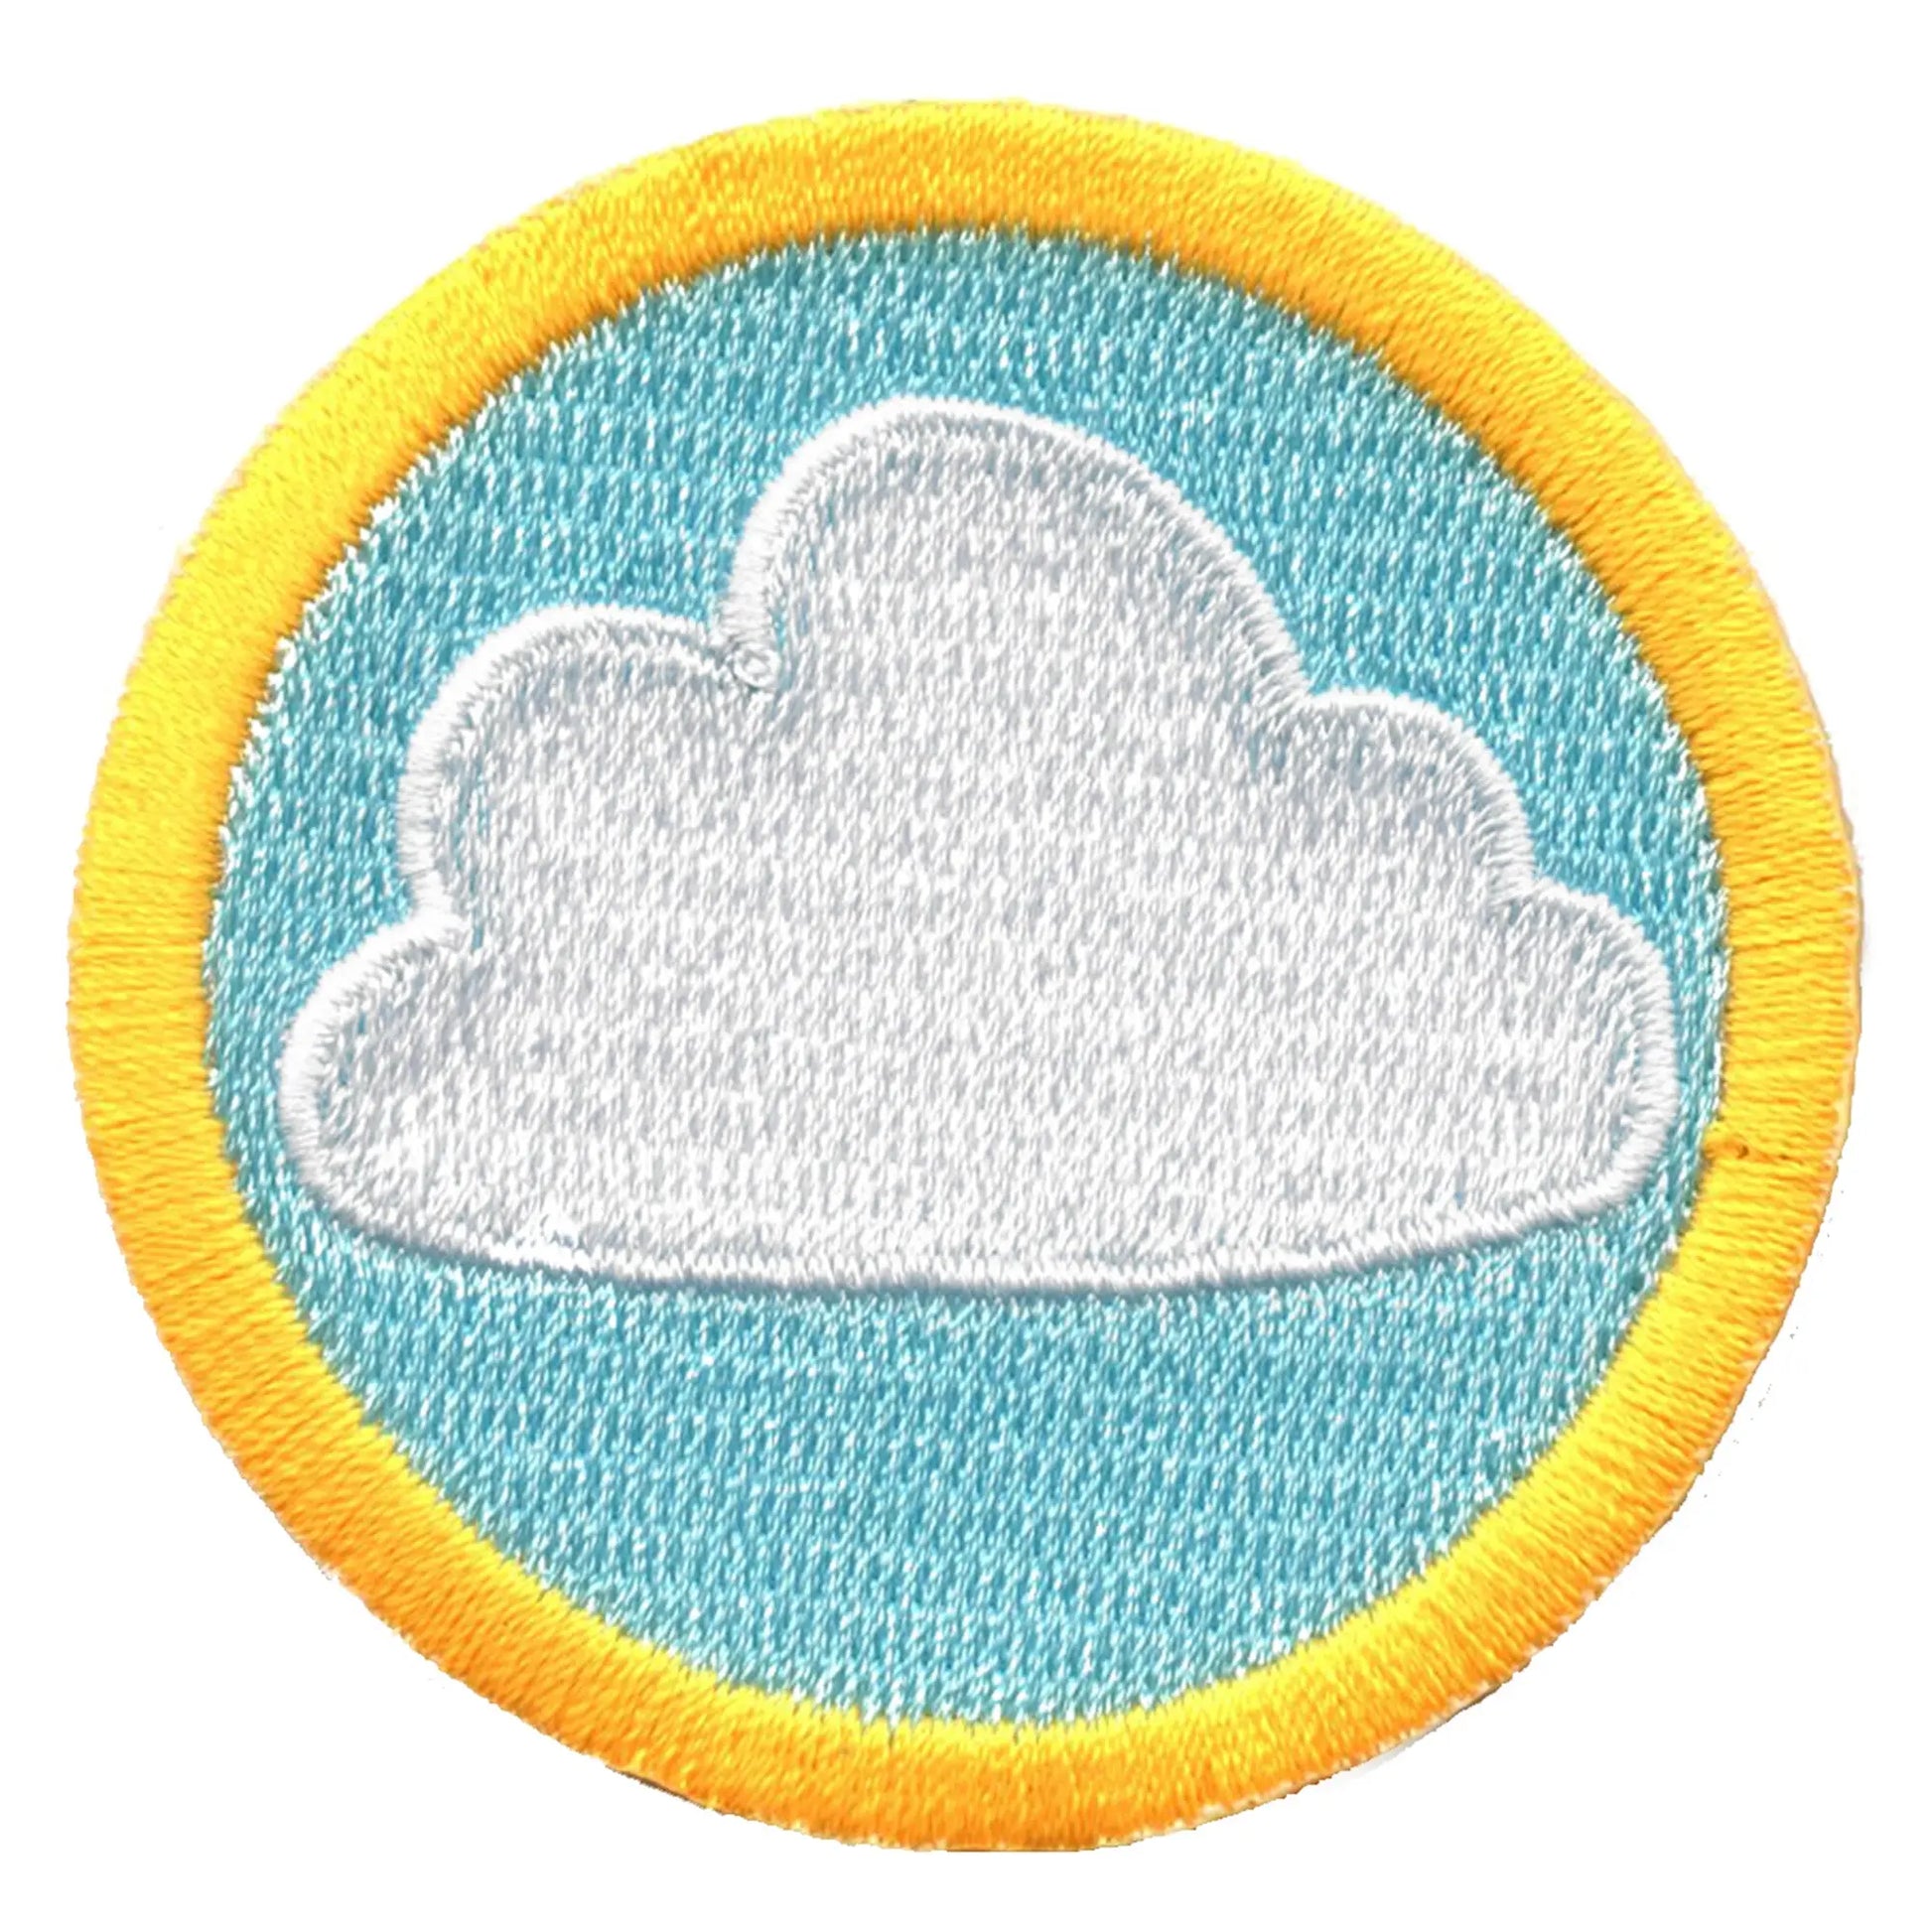 Weather Wilderness Scouts Merit Badge Iron on Patch 